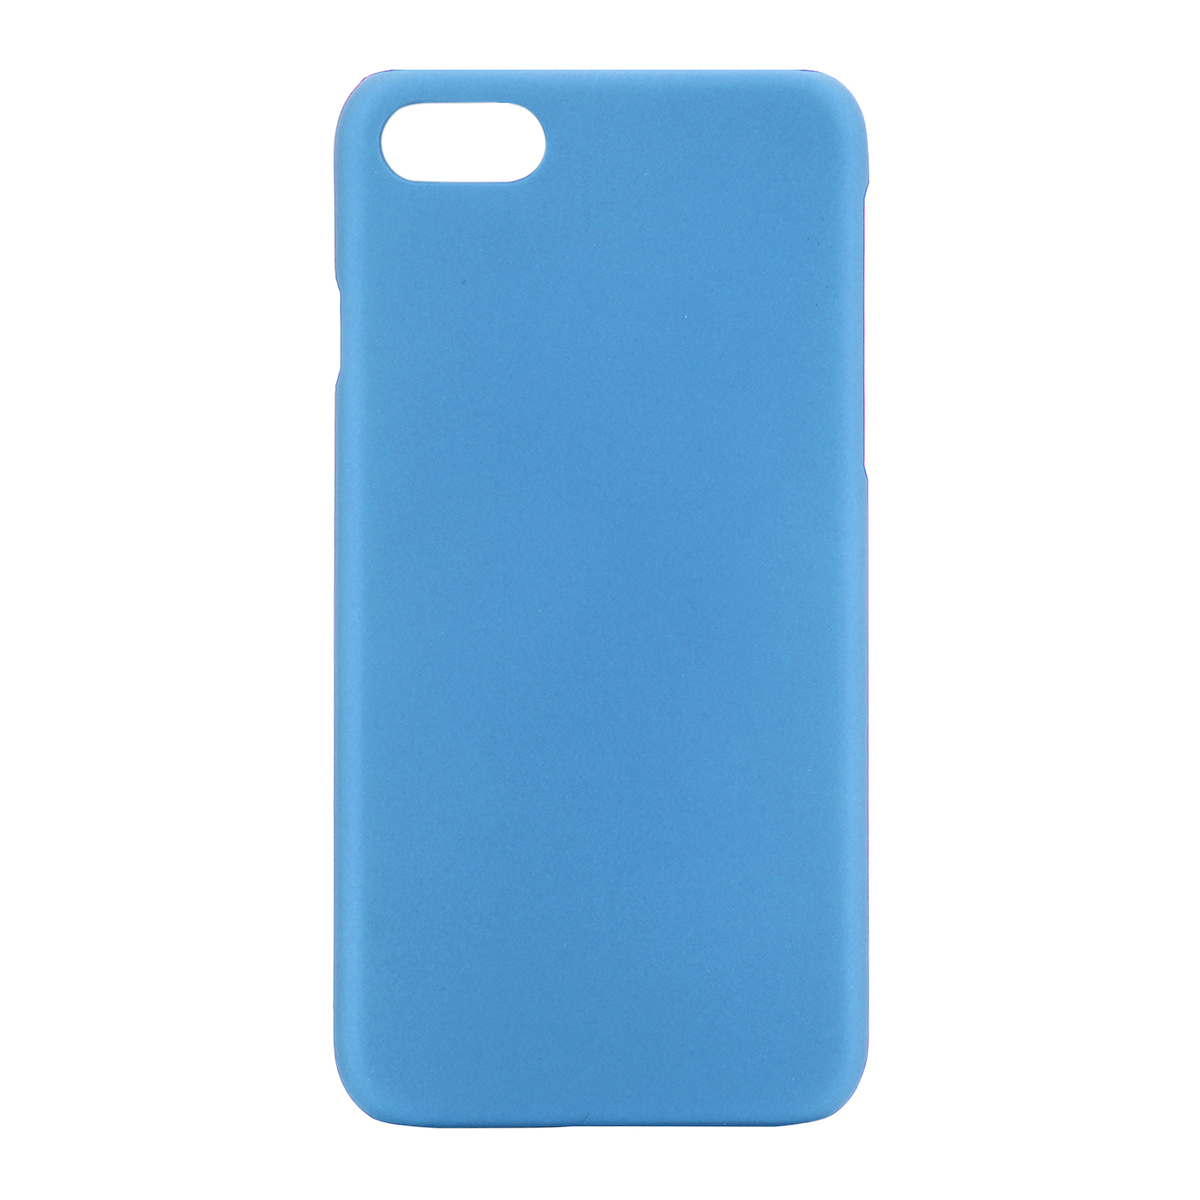 Multicolor Frosted Hard PC Protective Back Phone Case for iPhone 6s Plus - Blue